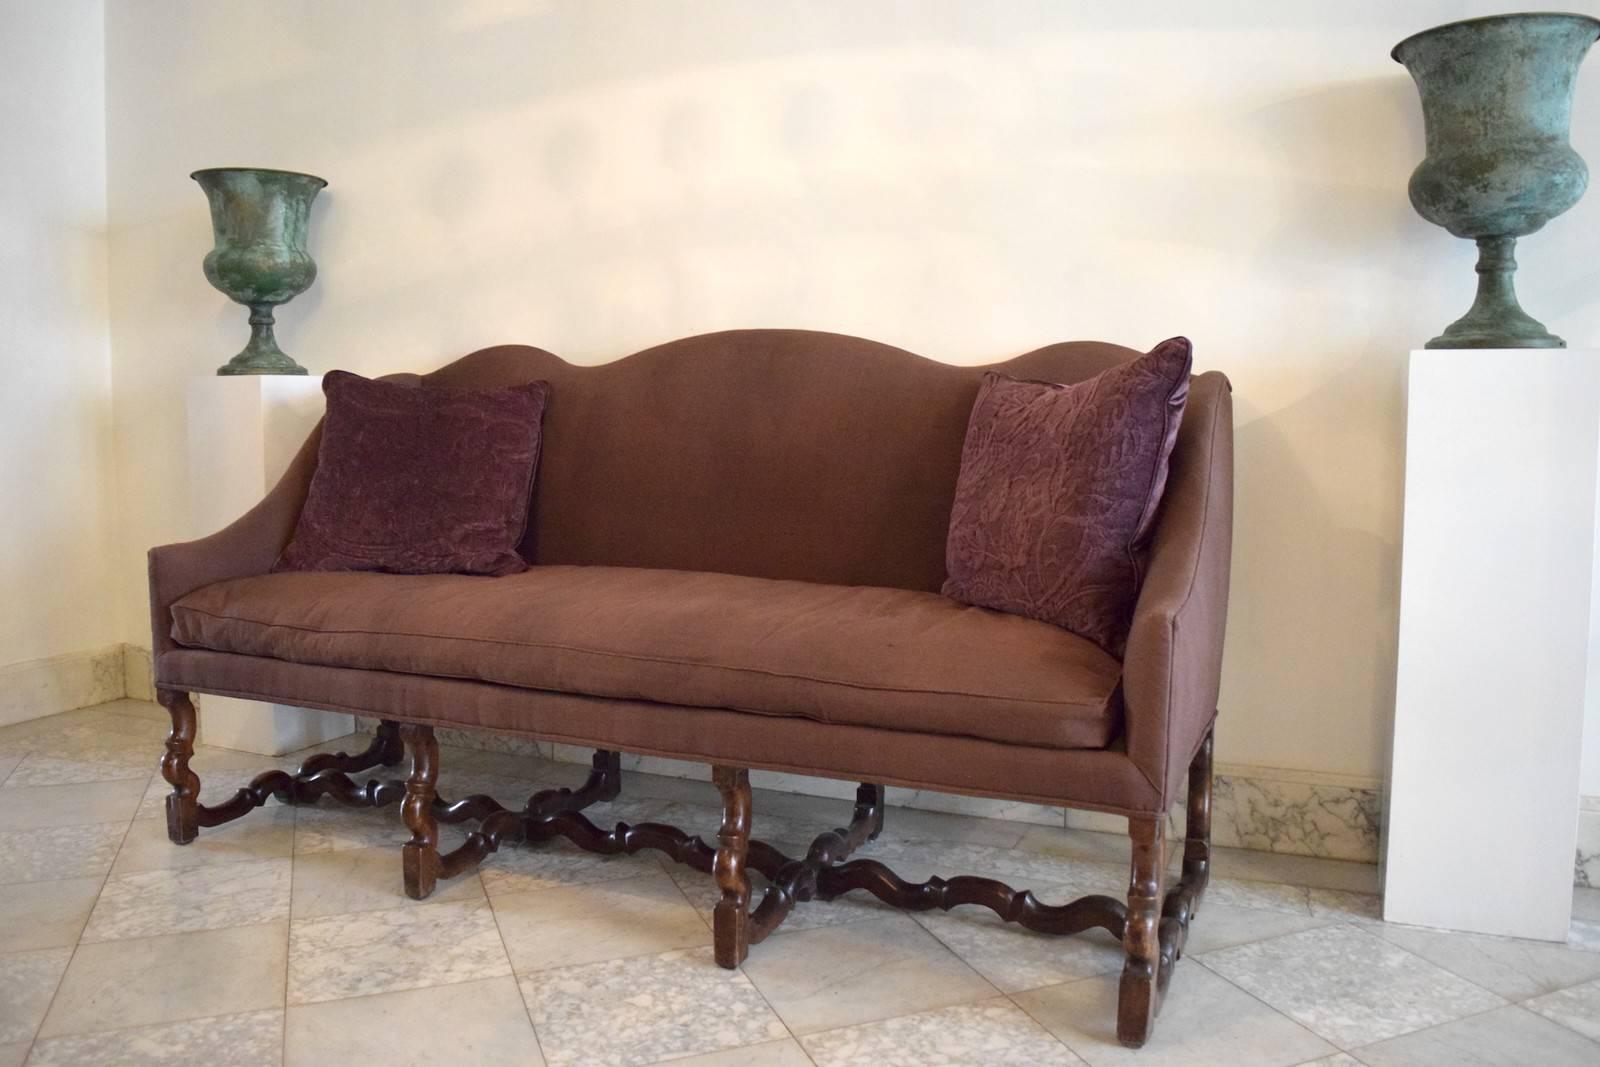 Settee in walnut and Belgian linen.
Warm brown / dark burgundy.
French
Early-mid 1700s.